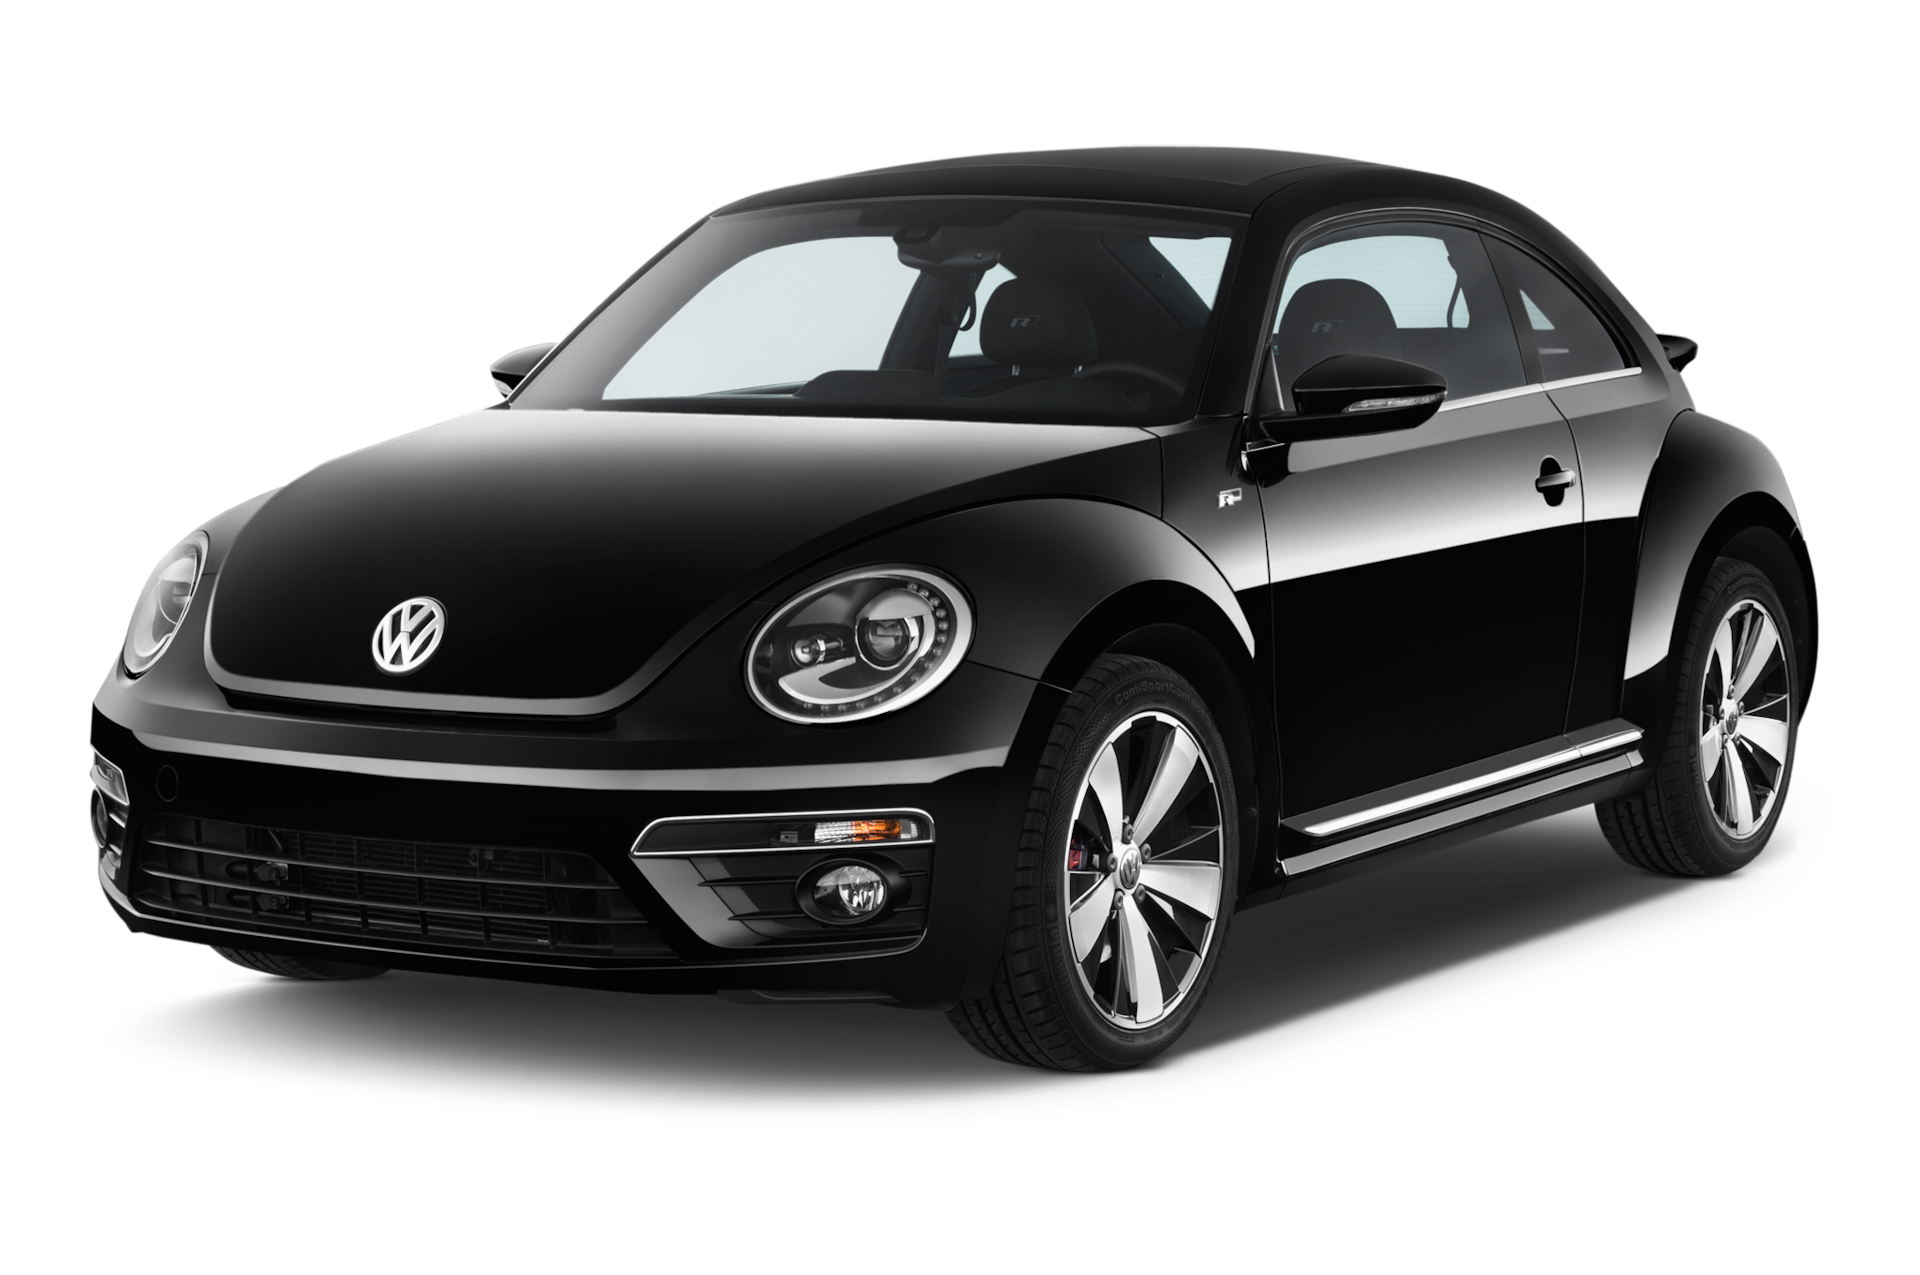 2015 Volkswagen Beetle Prices, Reviews, and Photos - MotorTrend